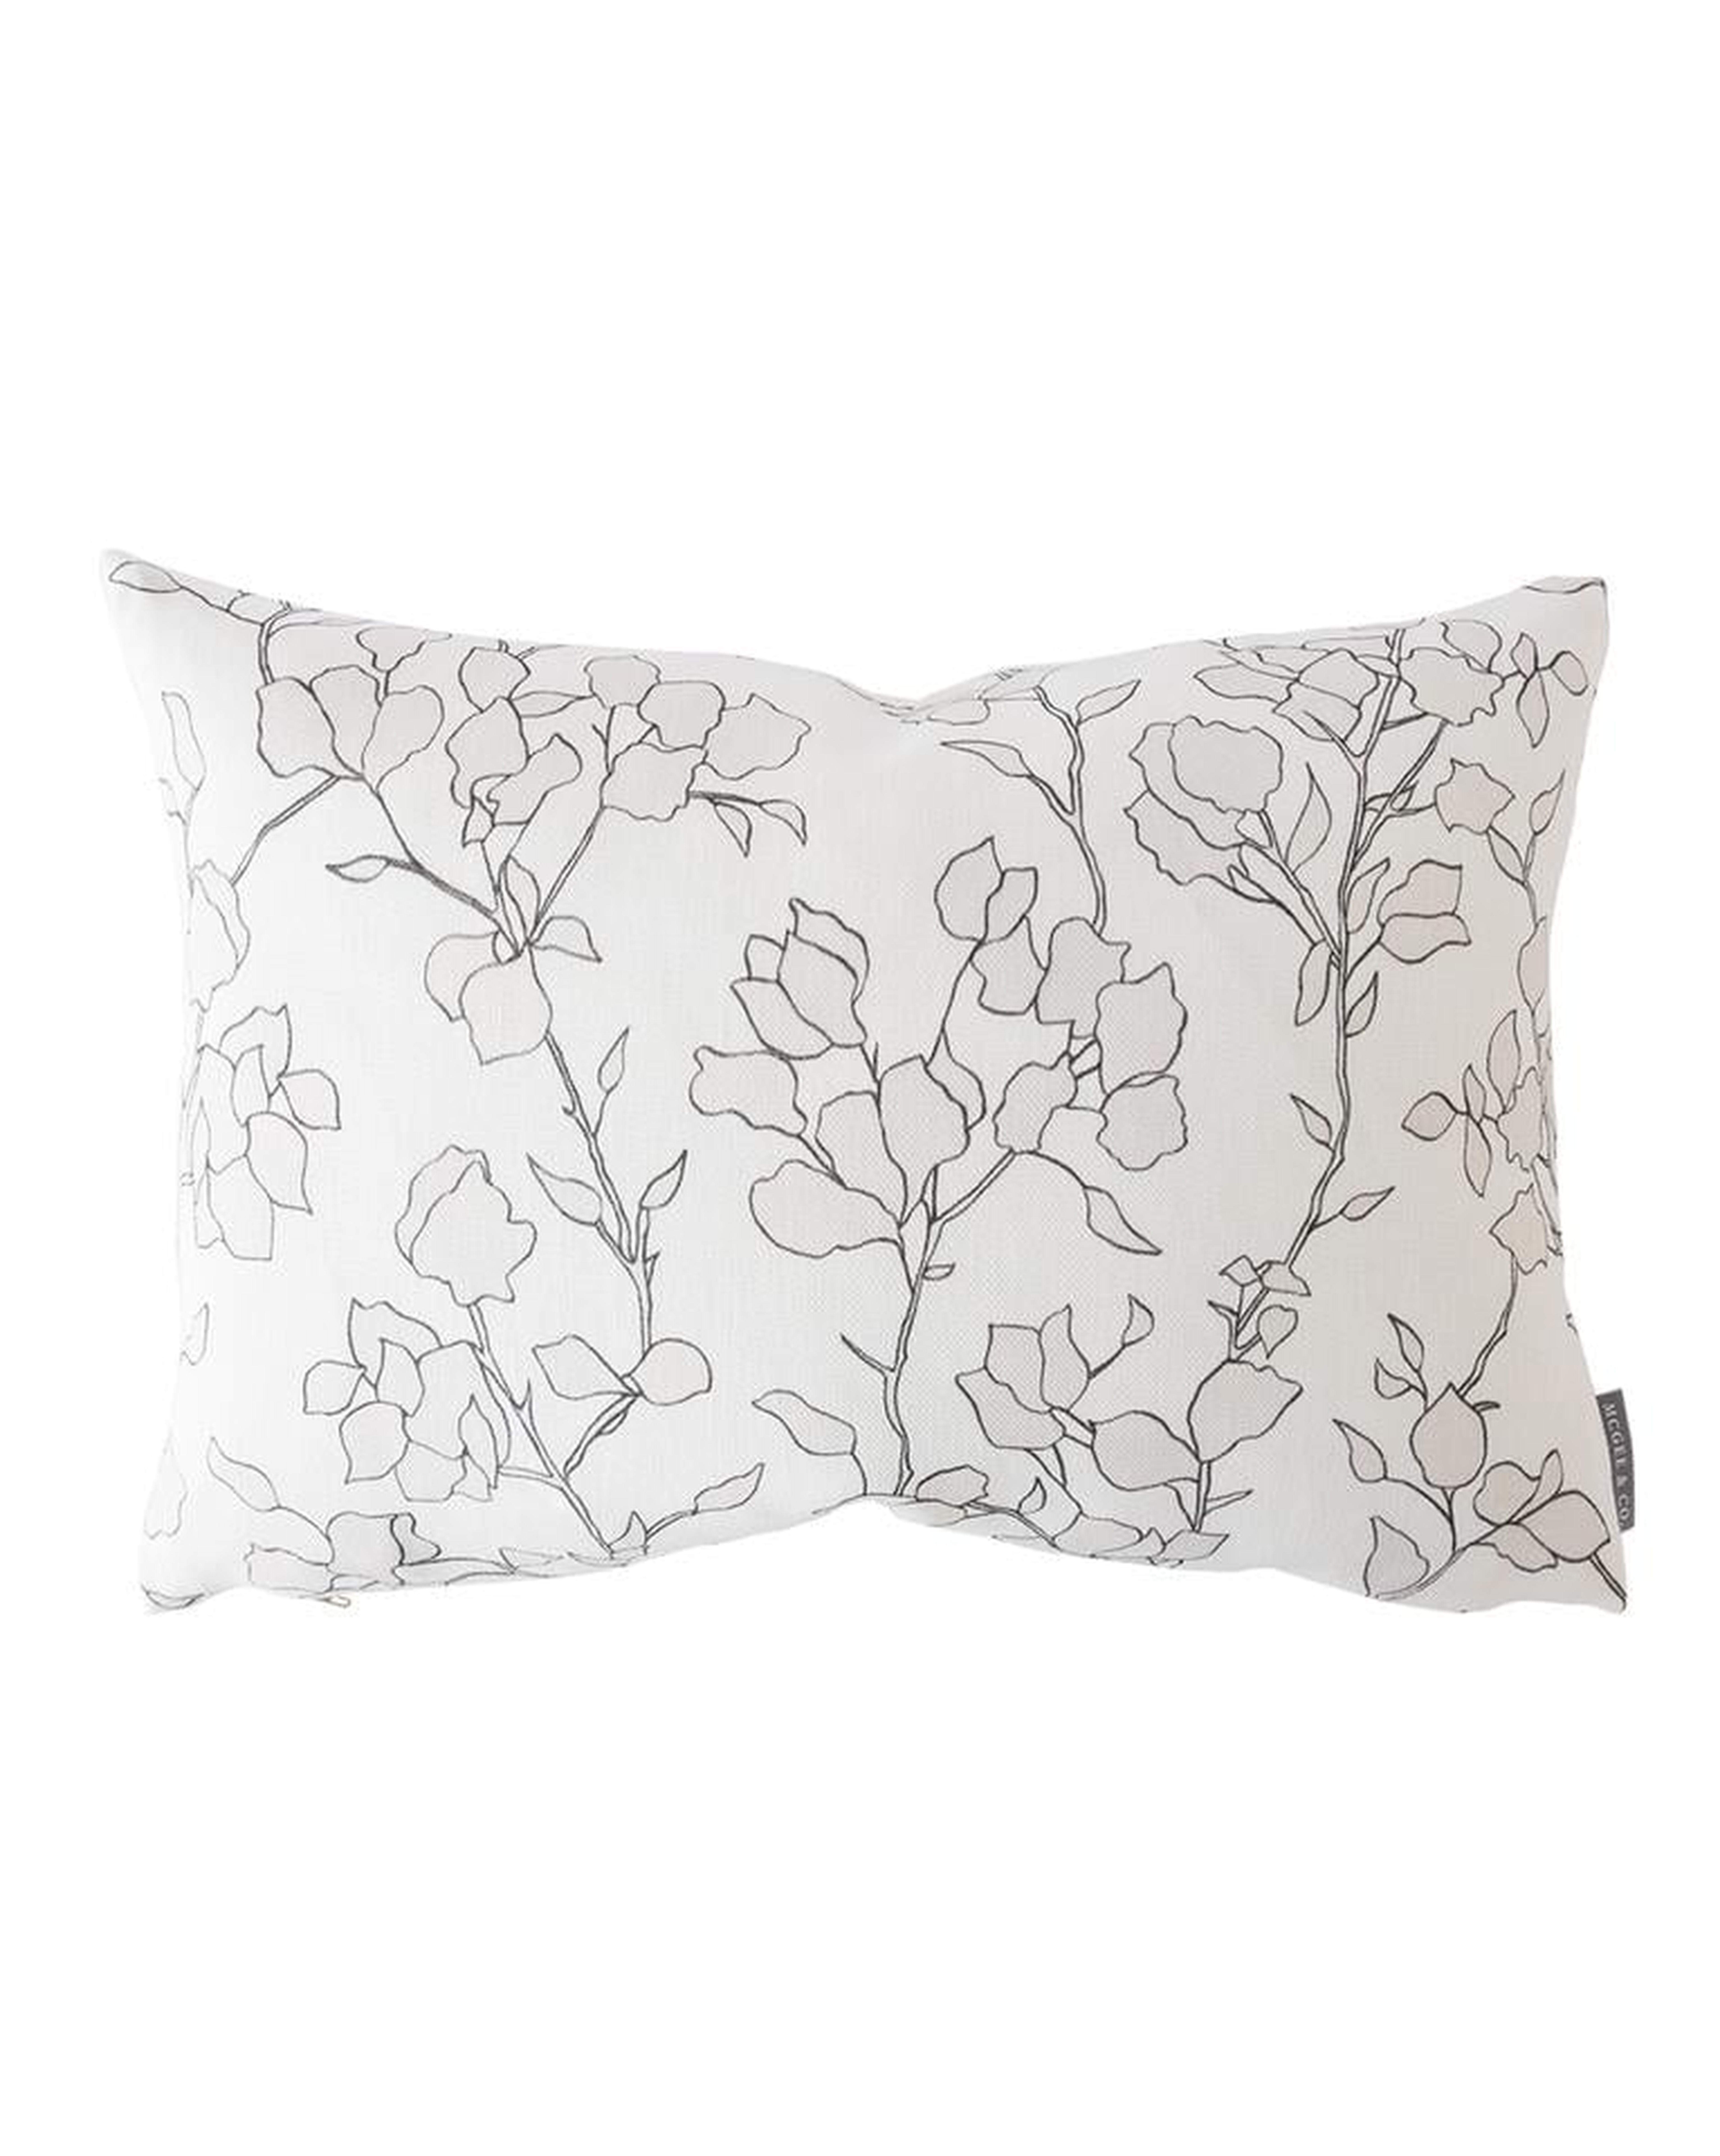 BLAIR SKETCHED FLORAL PILLOW COVER WITHOUT INSERT, 14" x 20" - McGee & Co.